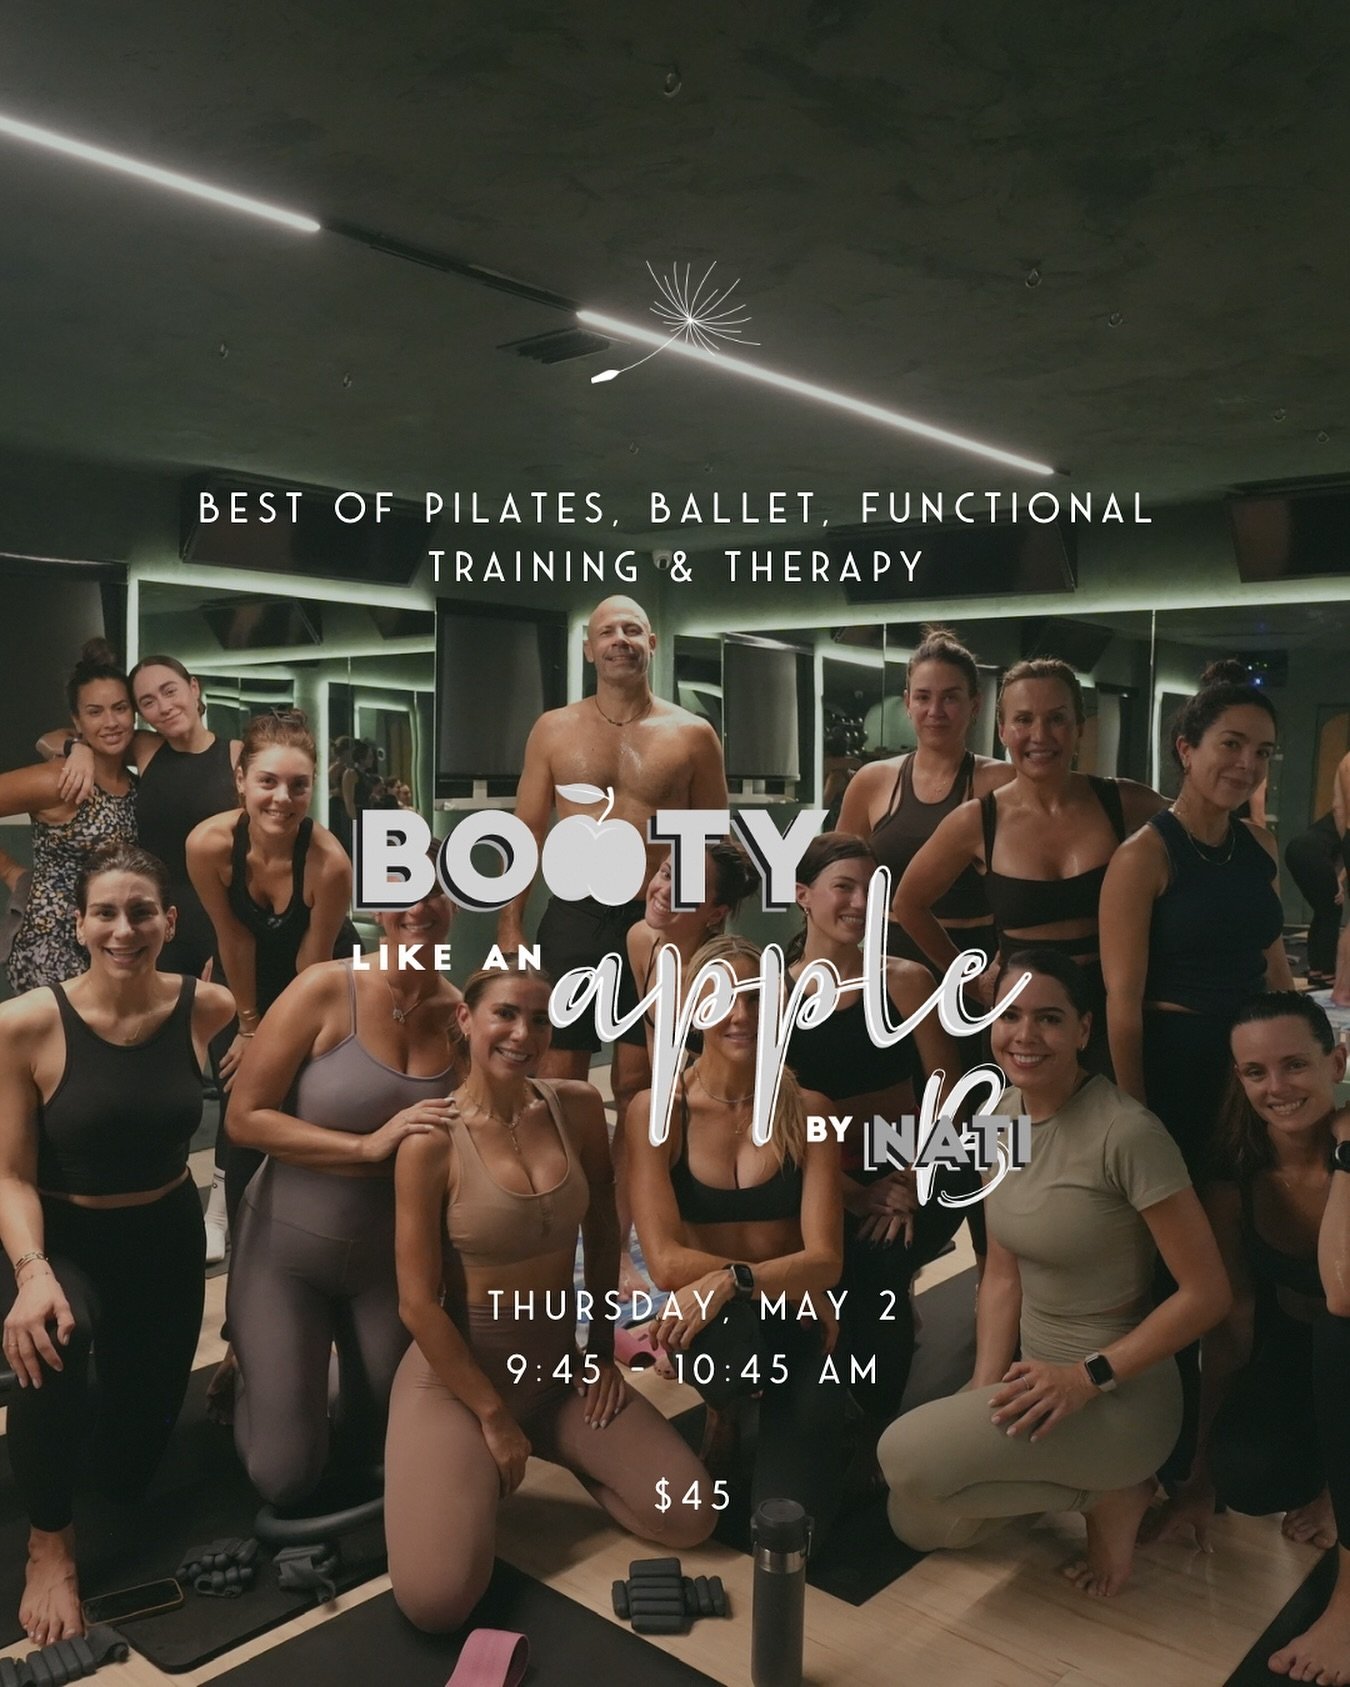 Back by popular demand! 🍎 🍑 Join us for another Booty Like An Apple special class with @natibotero7 next Thursday, May 2 at 9:45 AM. 
Sculpt your way to stunning with us! ✨
Tickets are $45&mdash;grab yours now and secure your spot in the link in bi